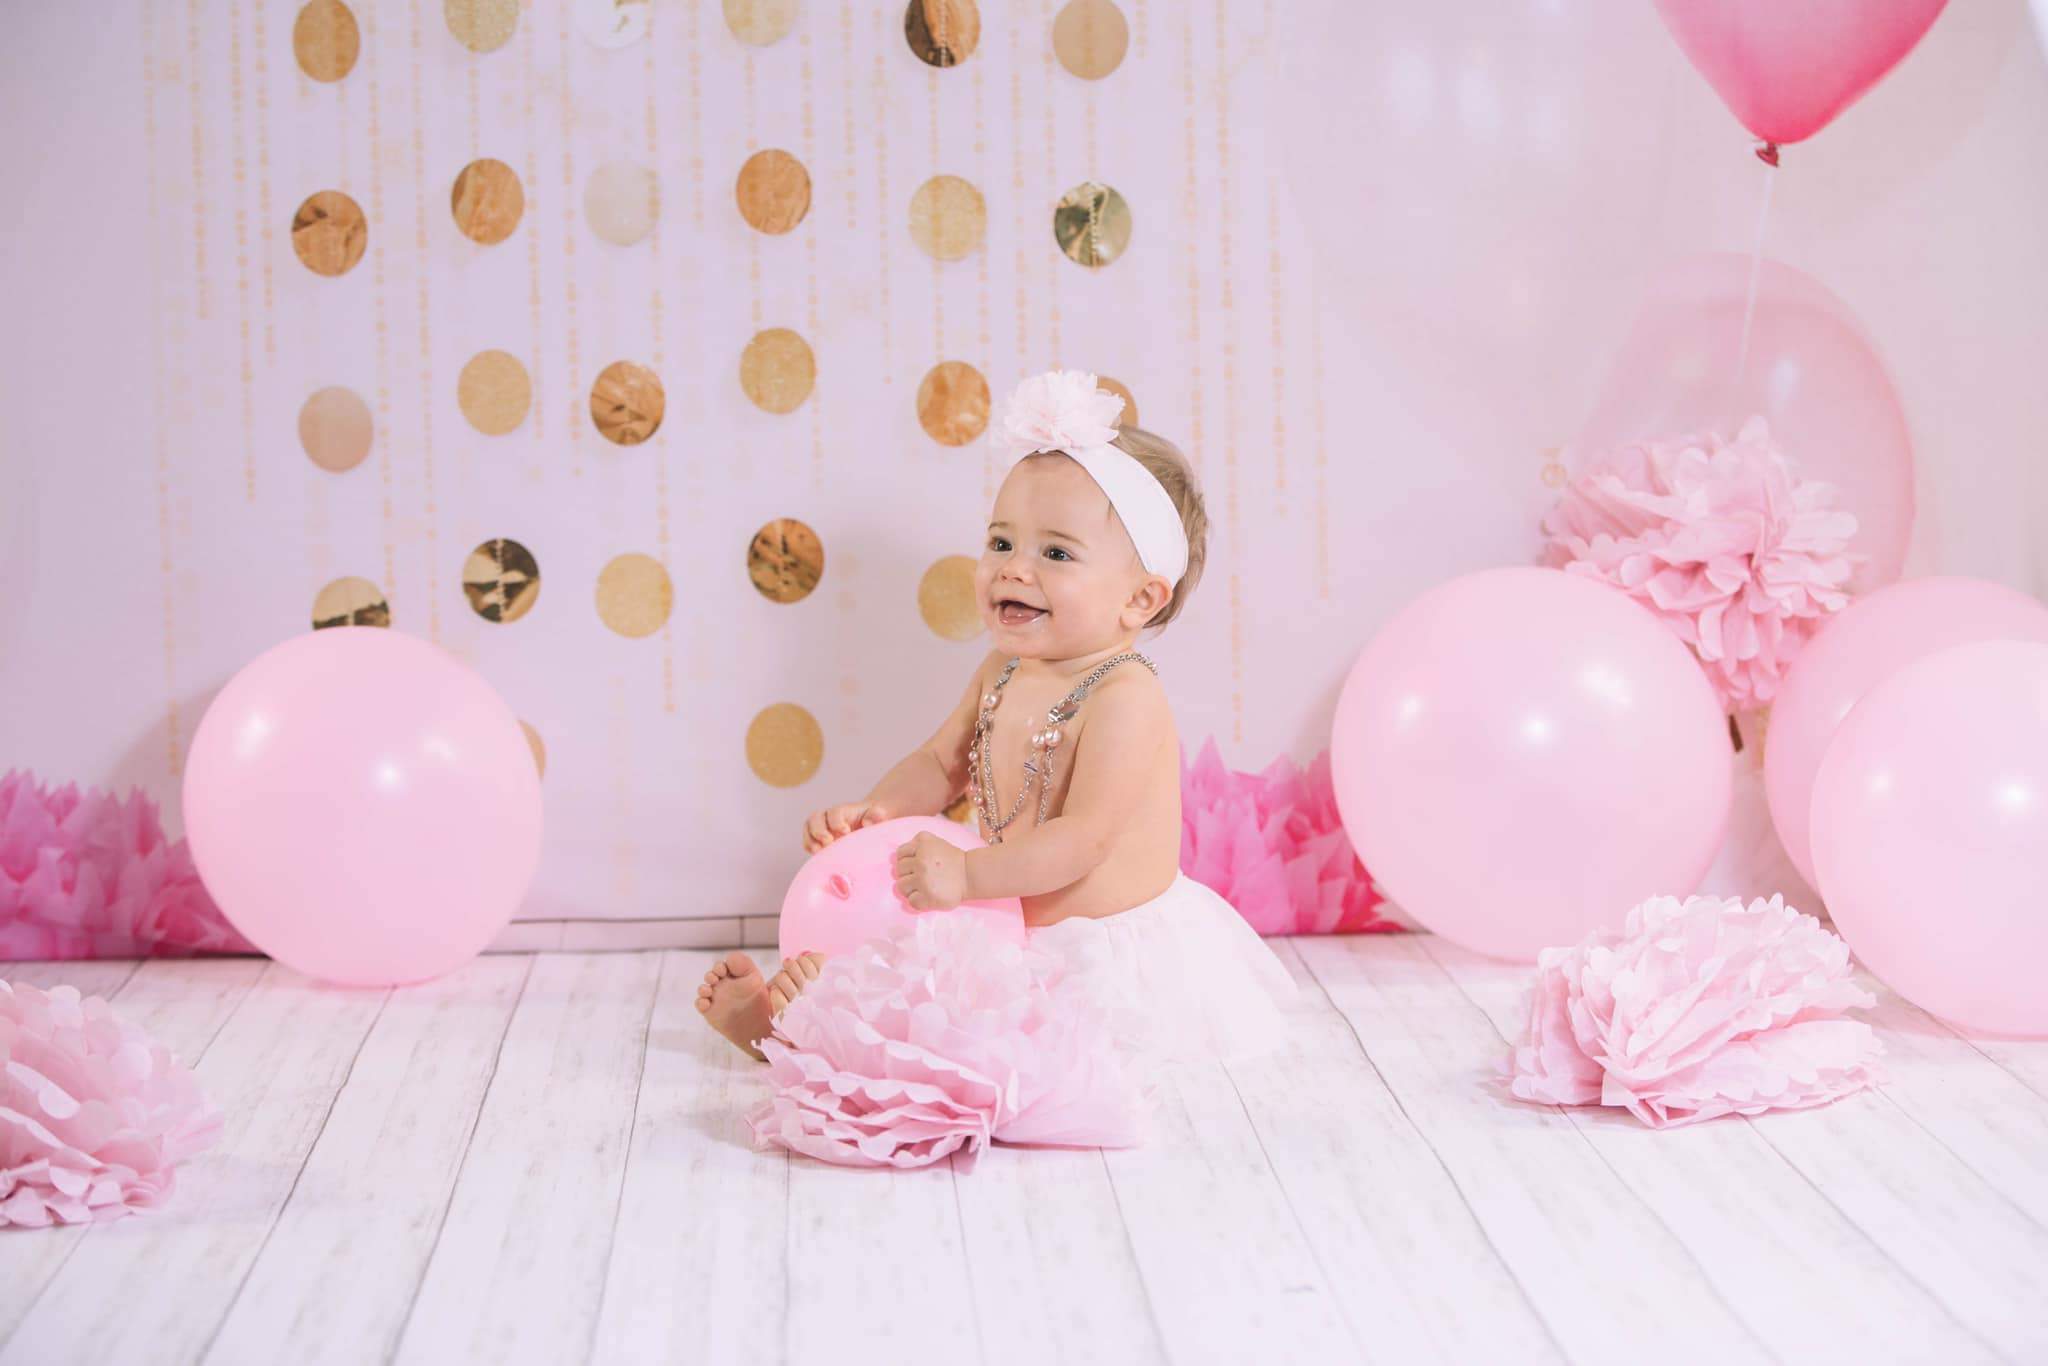 Kate Cake Smash with Balloons Pink Birthday Backdrop Designed By Jessica Evangeline photography